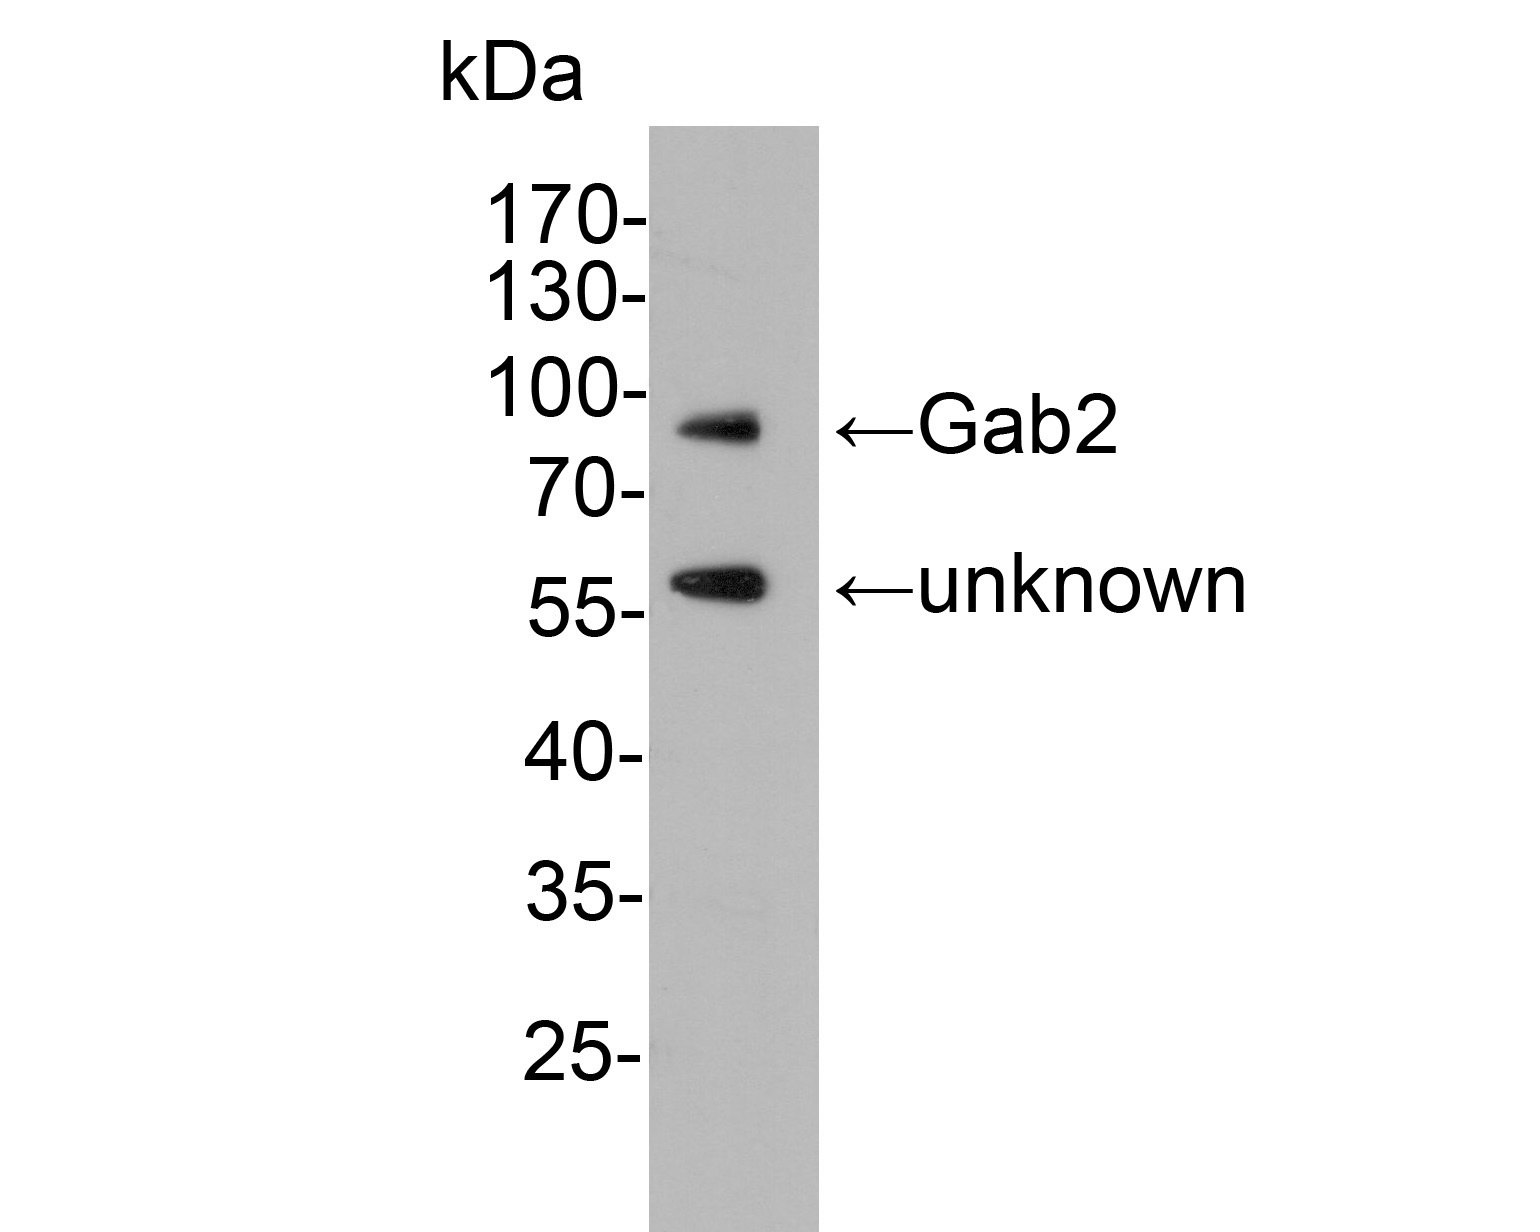 Western blot analysis of Gab2 on rat brain tissue lysate. Proteins were transferred to a PVDF membrane and blocked with 5% NFDM/TBST for 1 hour at room temperature. The primary antibody (HA500292, 1/1,000) was used in 5% NFDM/TBST at room temperature for 2 hours. Goat Anti-Rabbit IgG - HRP Secondary Antibody (HA1001) at 1:200,000 dilution was used for 1 hour at room temperature.